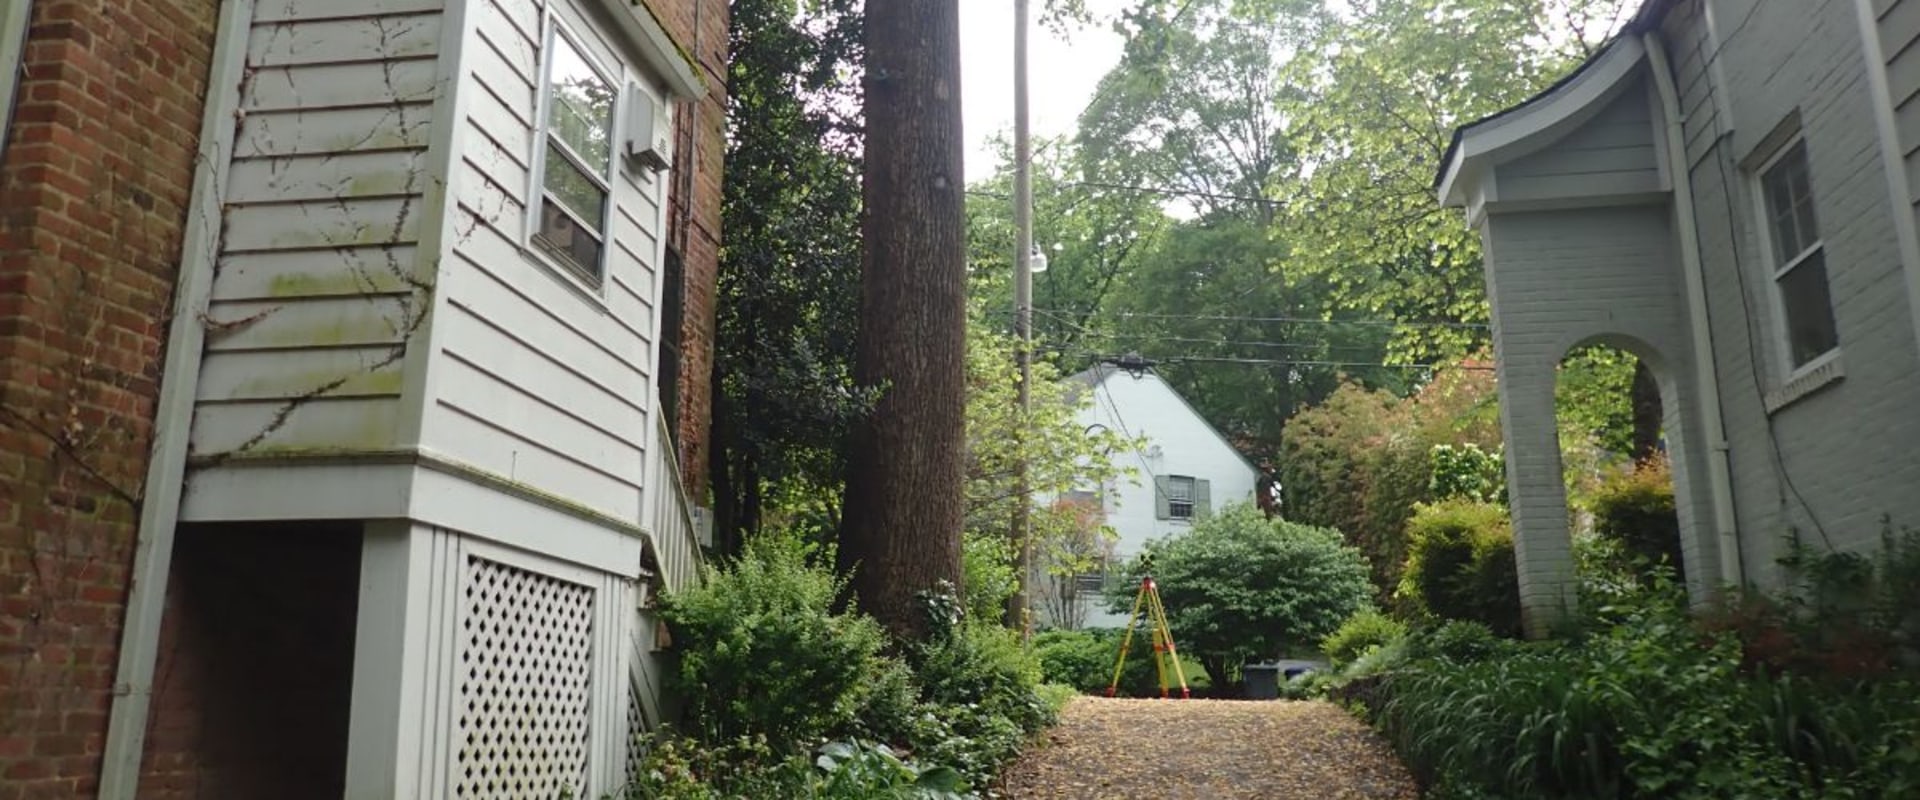 The Importance of Obtaining a Permit for Residential Tree Removal